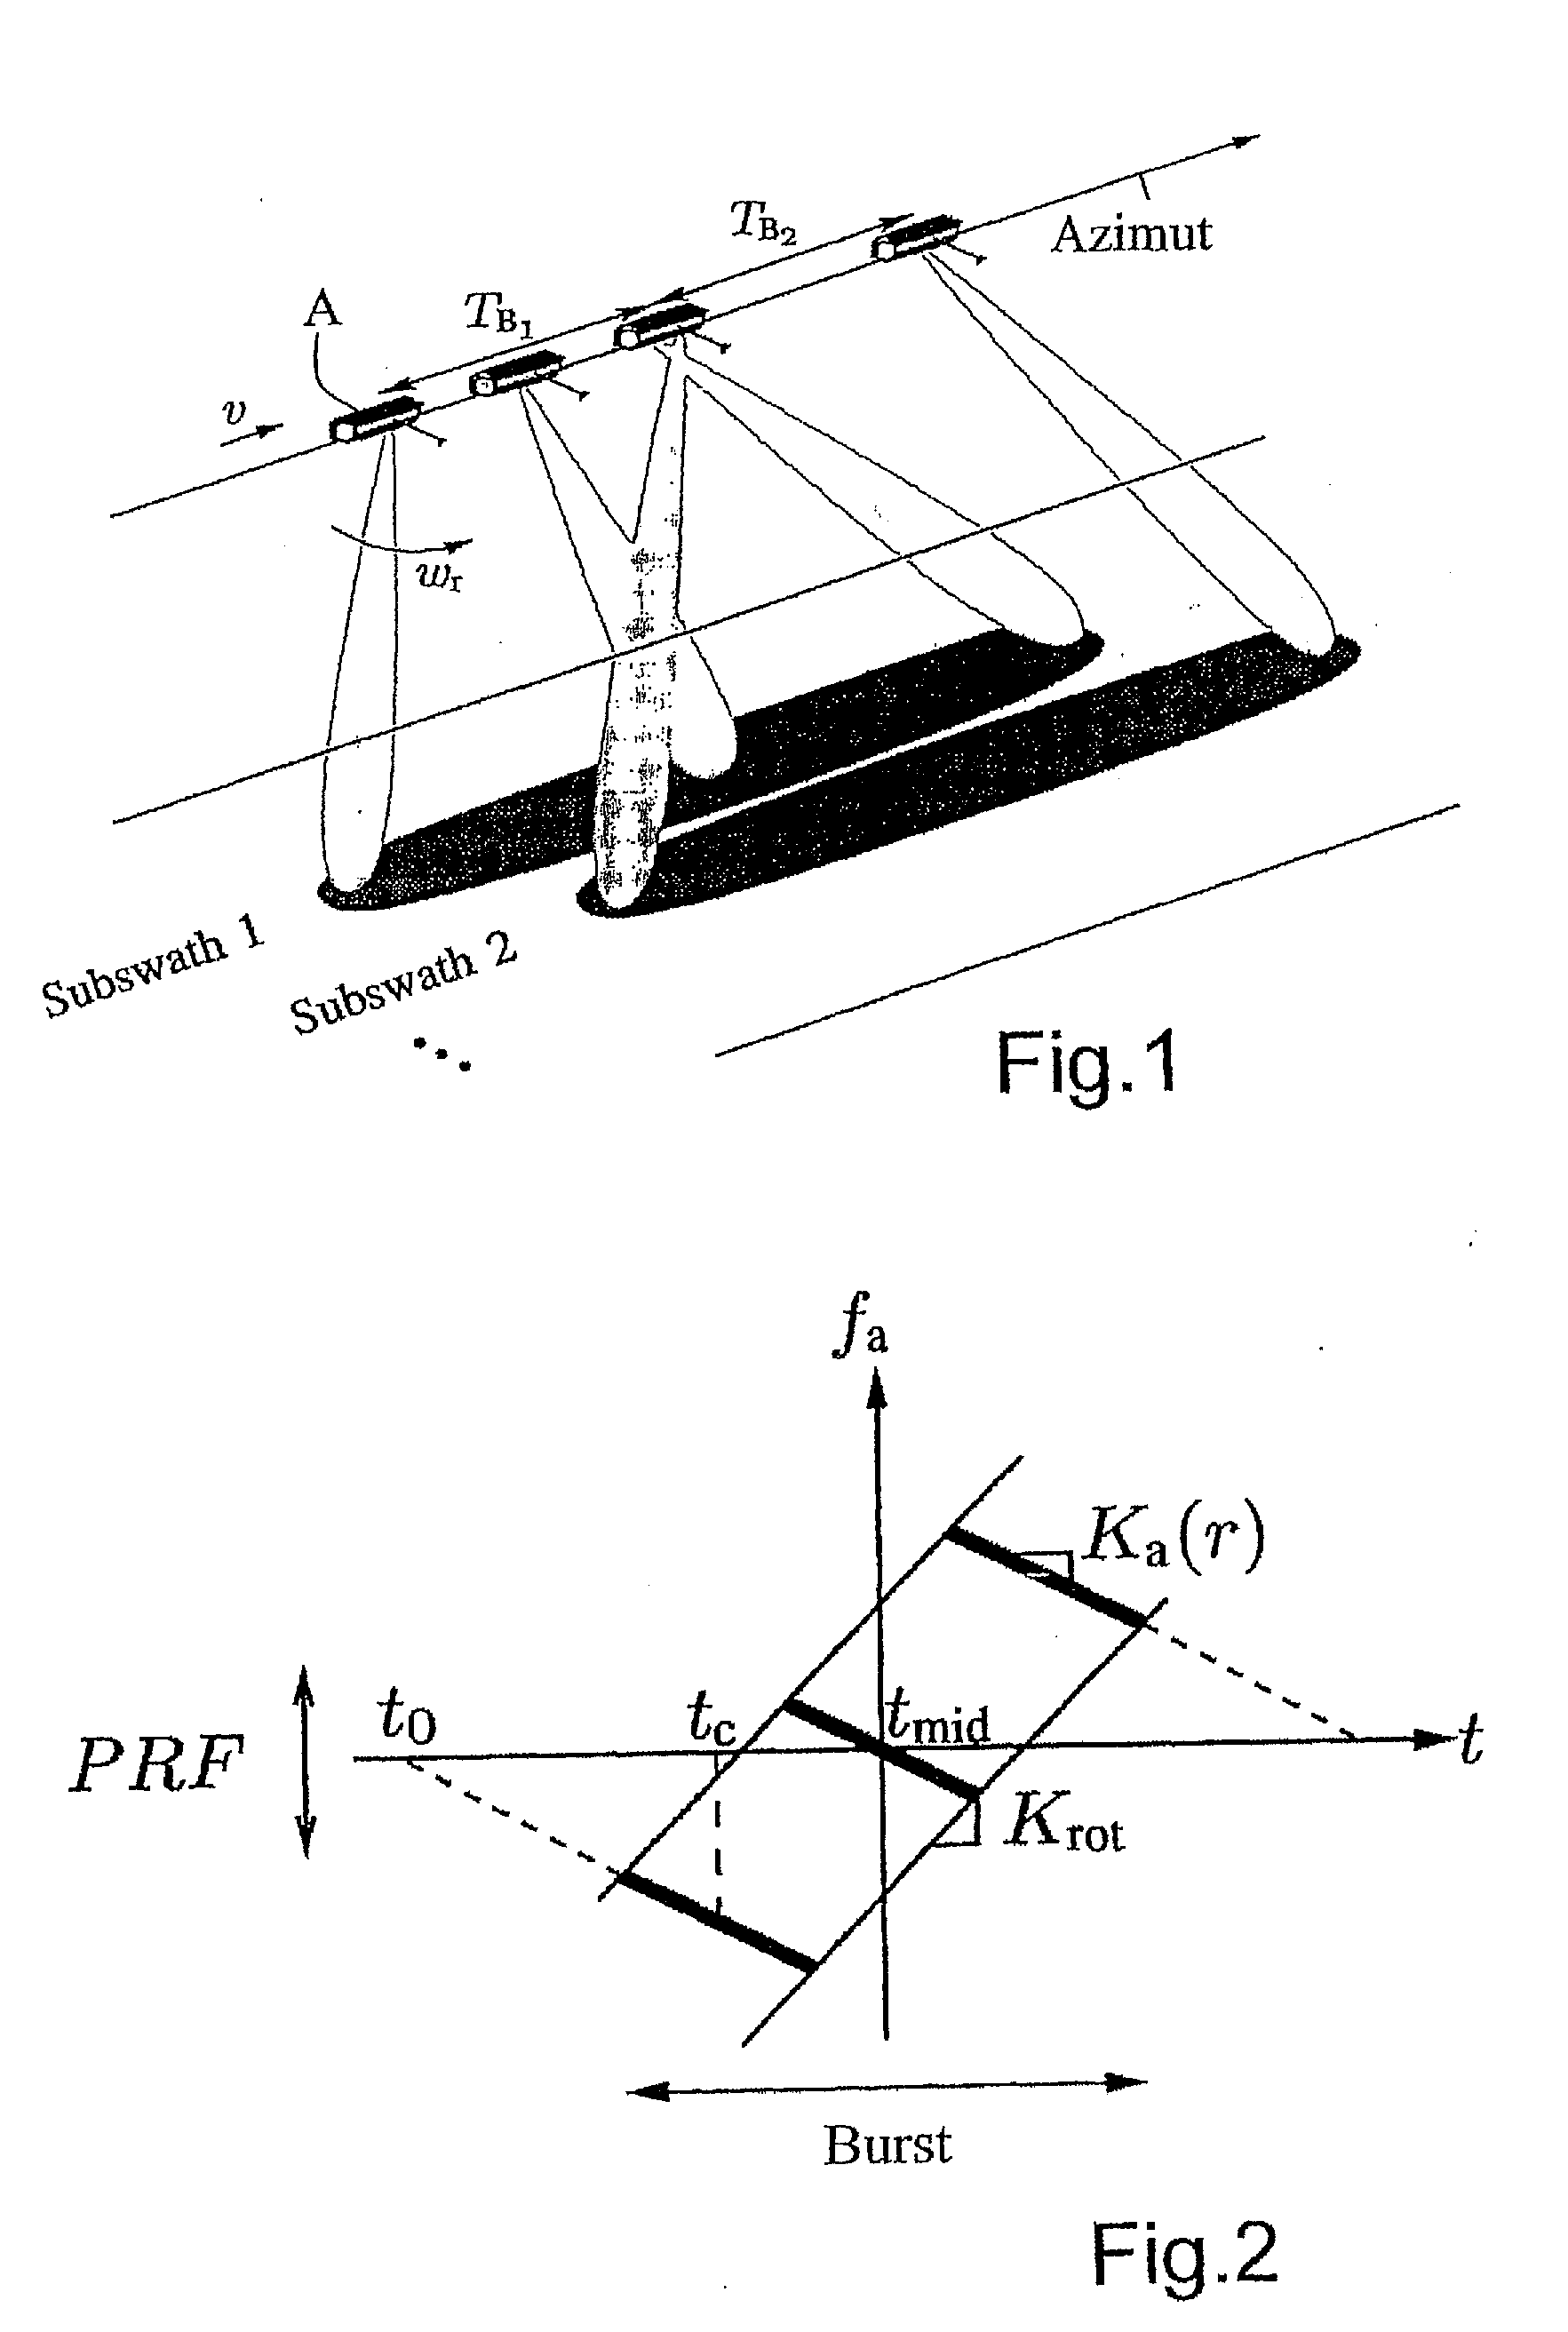 Method for processing TOPS (Terrain Observation by Progressive Scan)-SAR (Synthetic Aperture Radar)-Raw Data